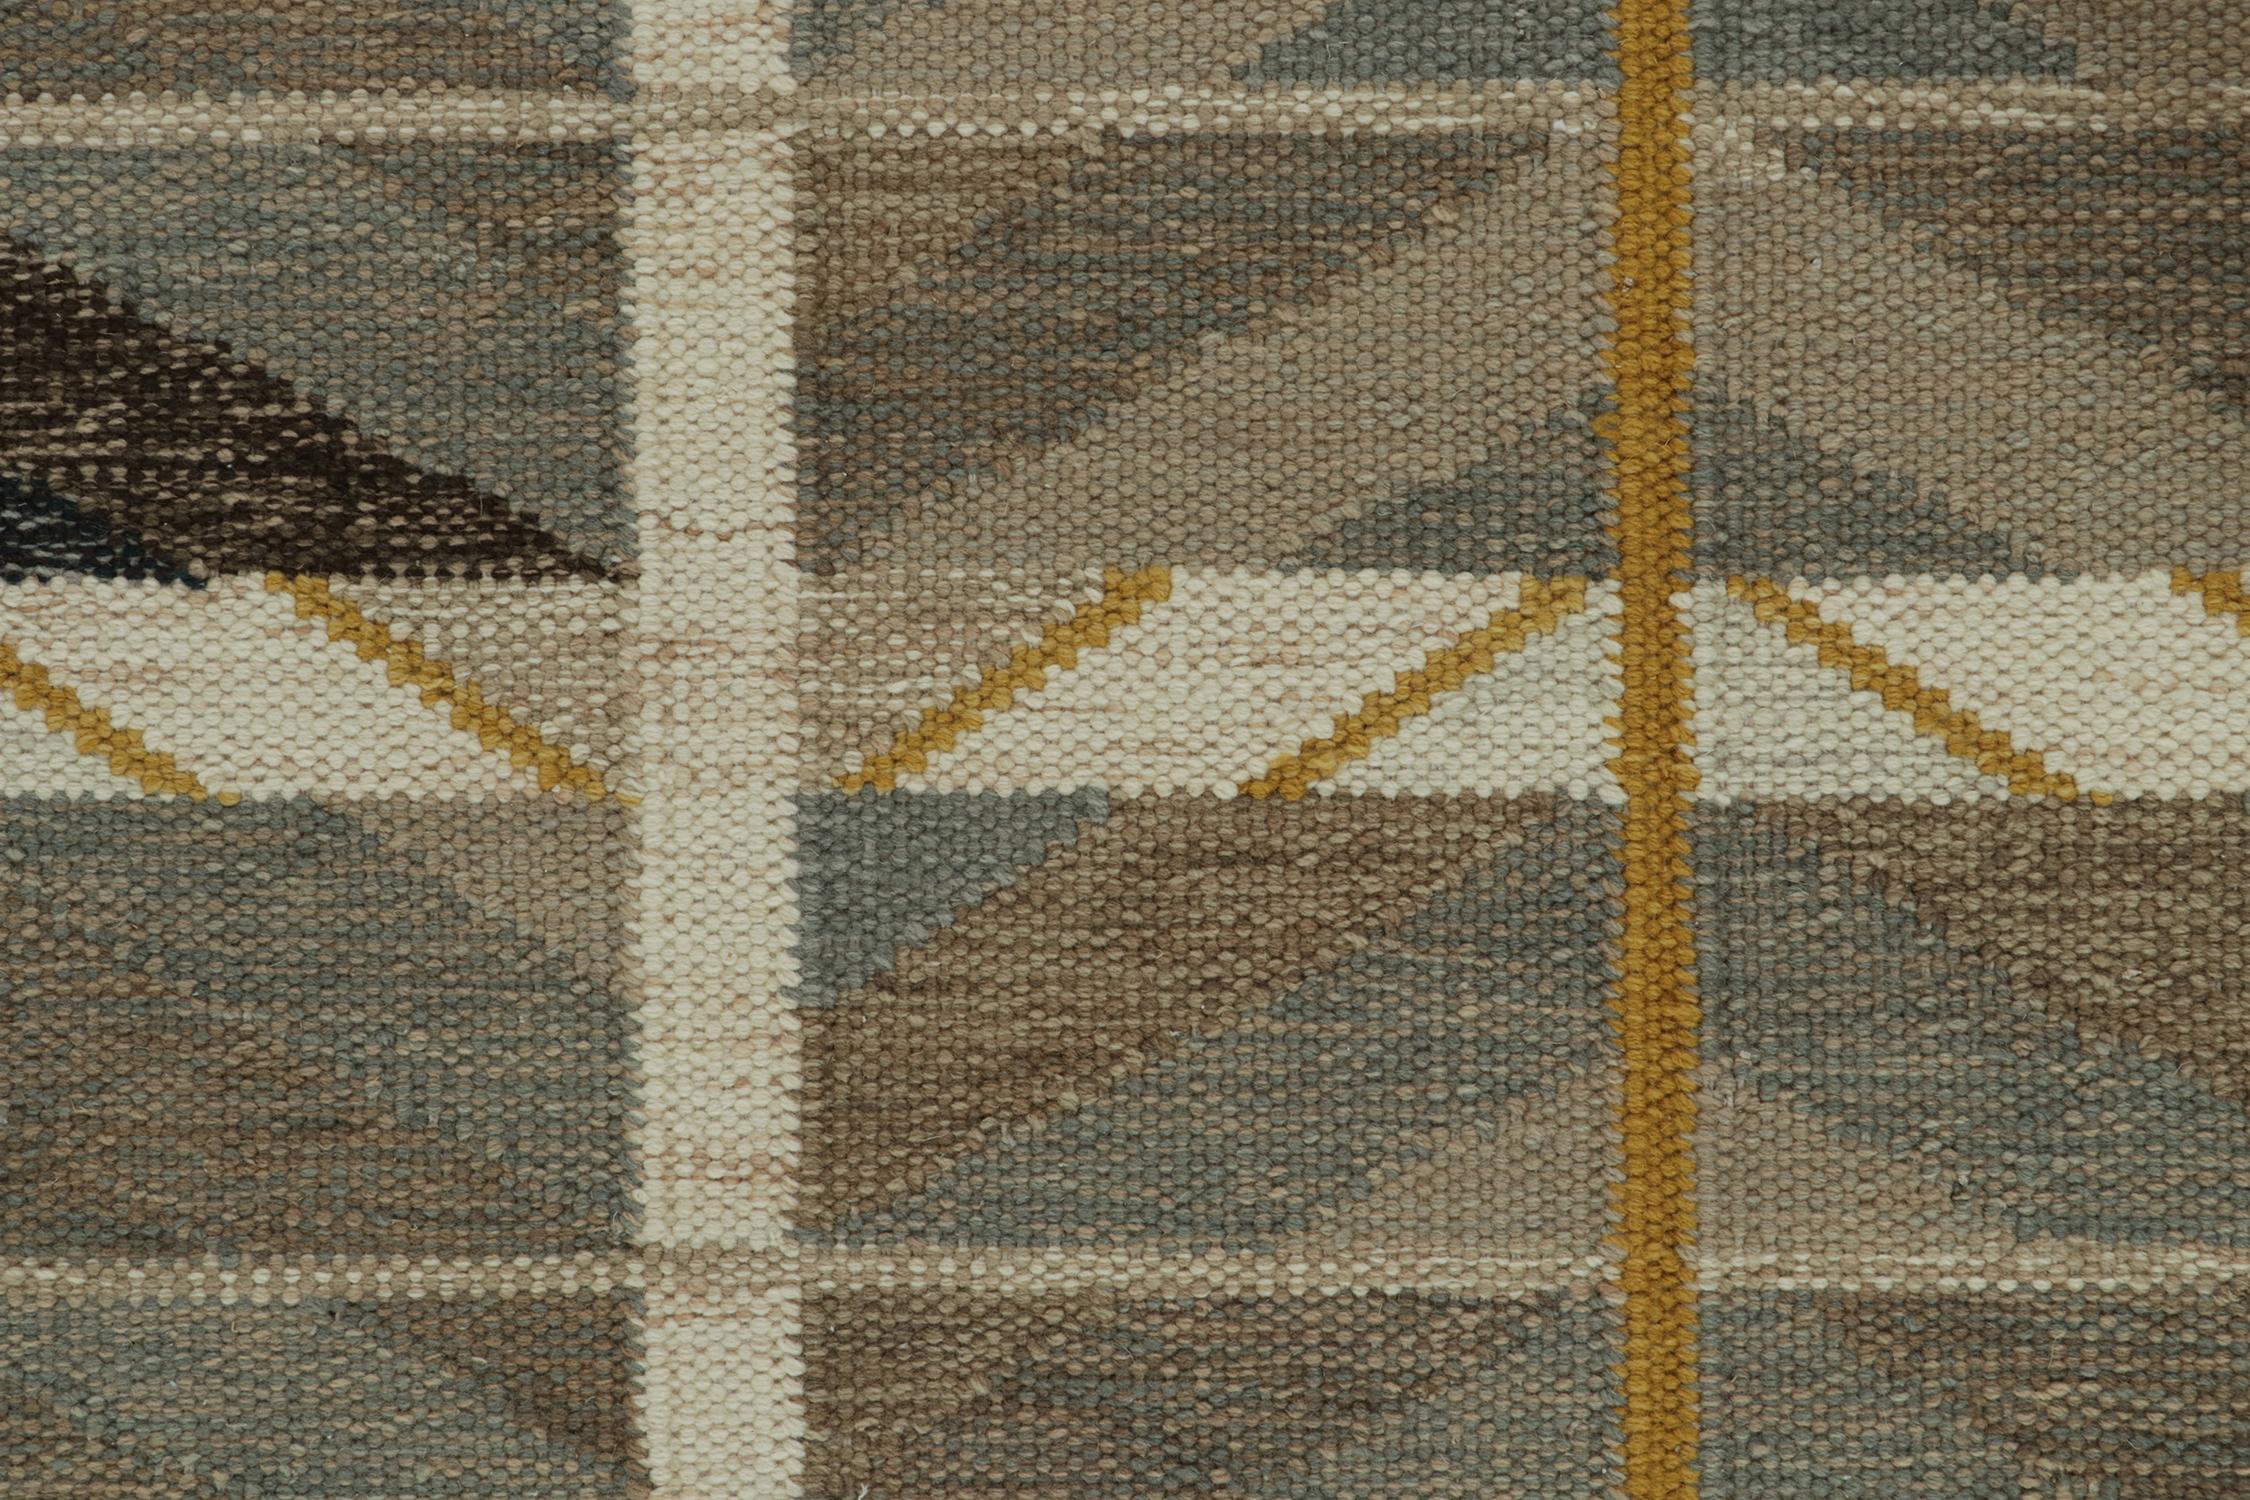 Rug & Kilim’s Scandinavian Style Kilim Rug in Beige-Brown & Gold Geometric Patte In New Condition For Sale In Long Island City, NY